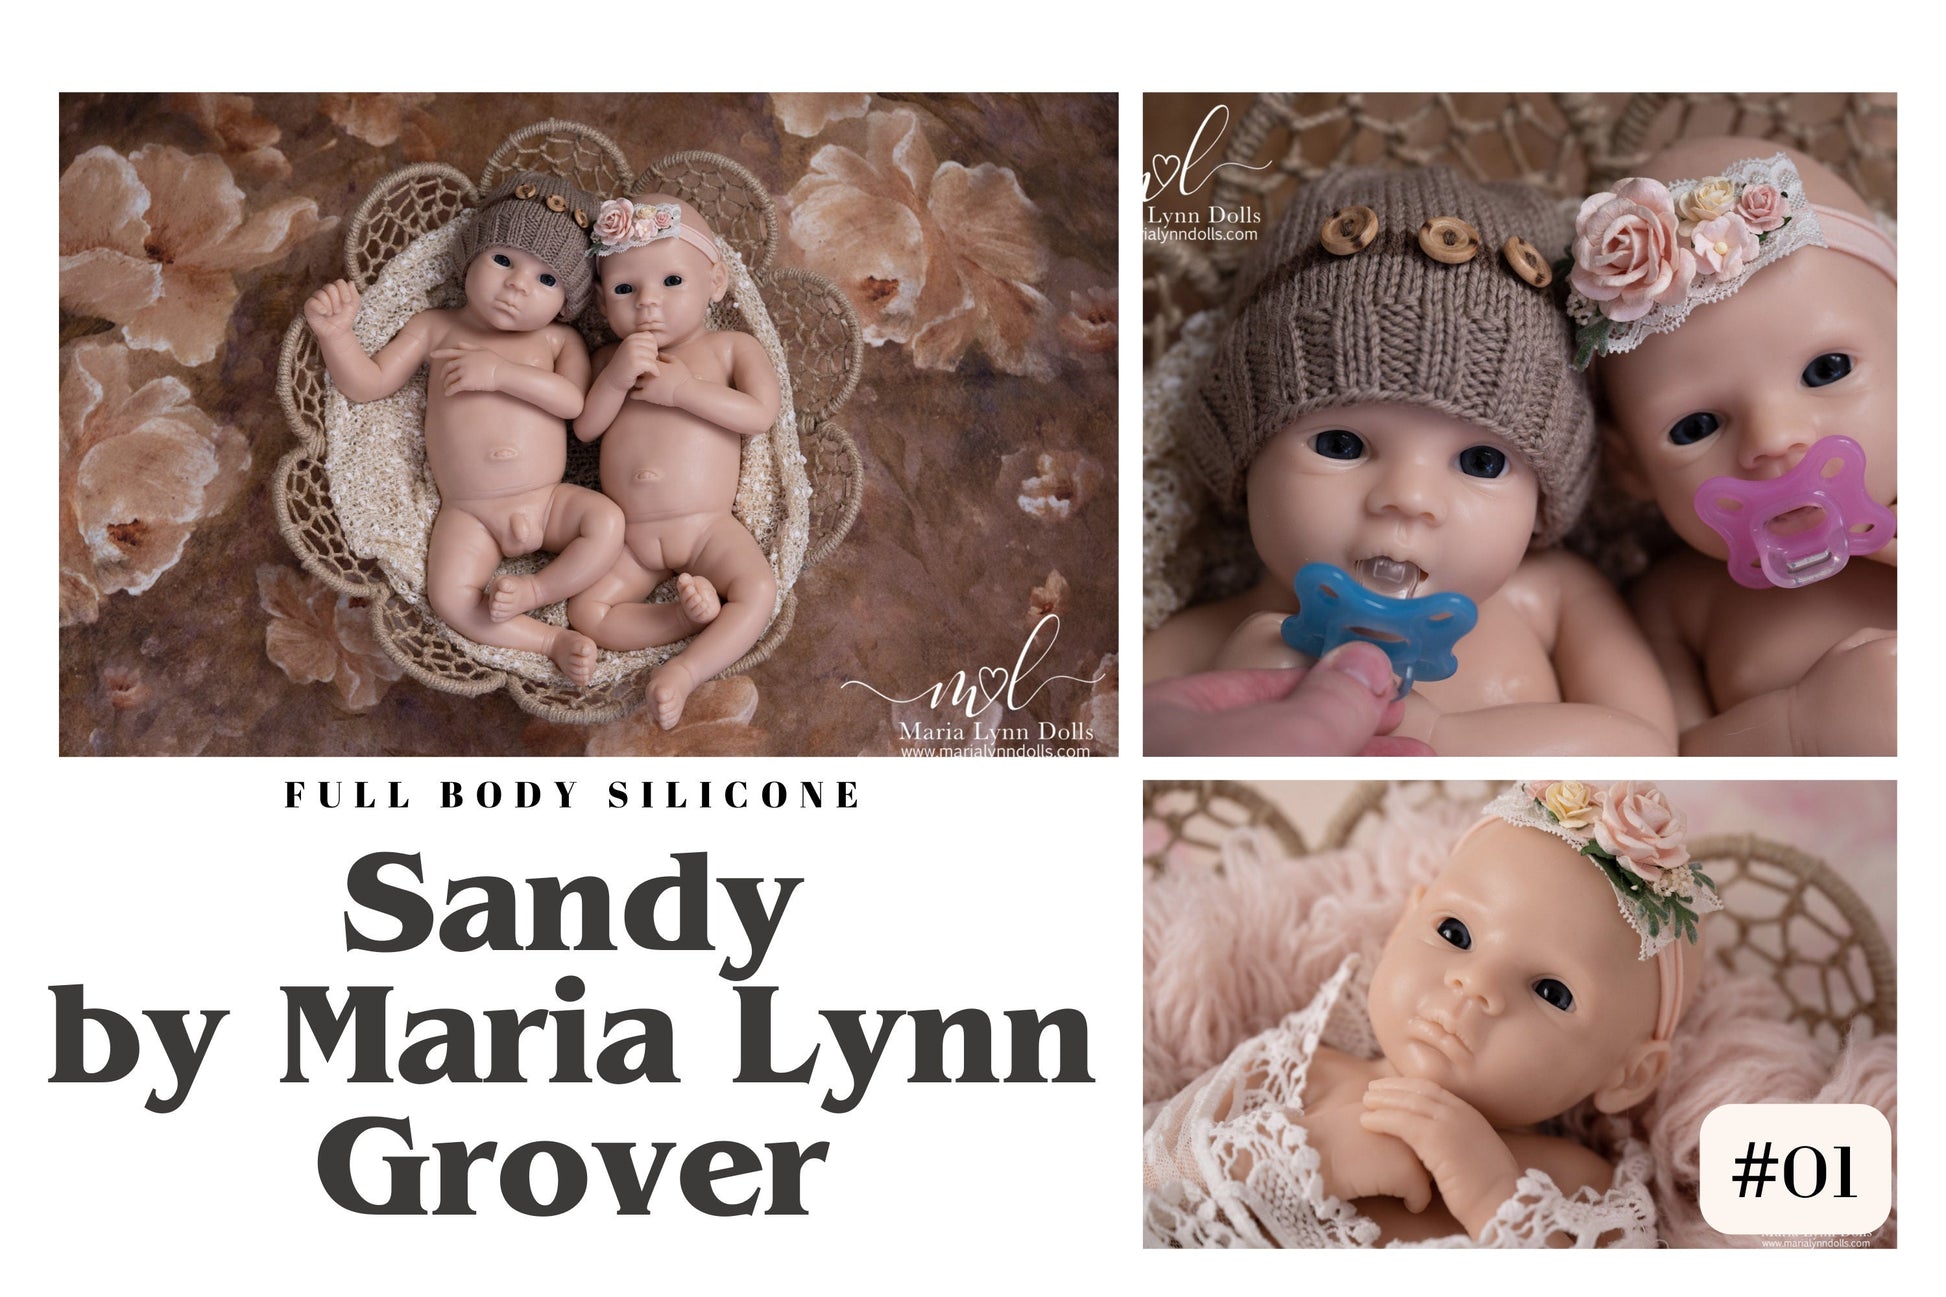 Drink & Wet + Armatures - FULL-BODY SILICONE Sandy by Maria Lynn Grover (19 inches 6lbs 4oz)